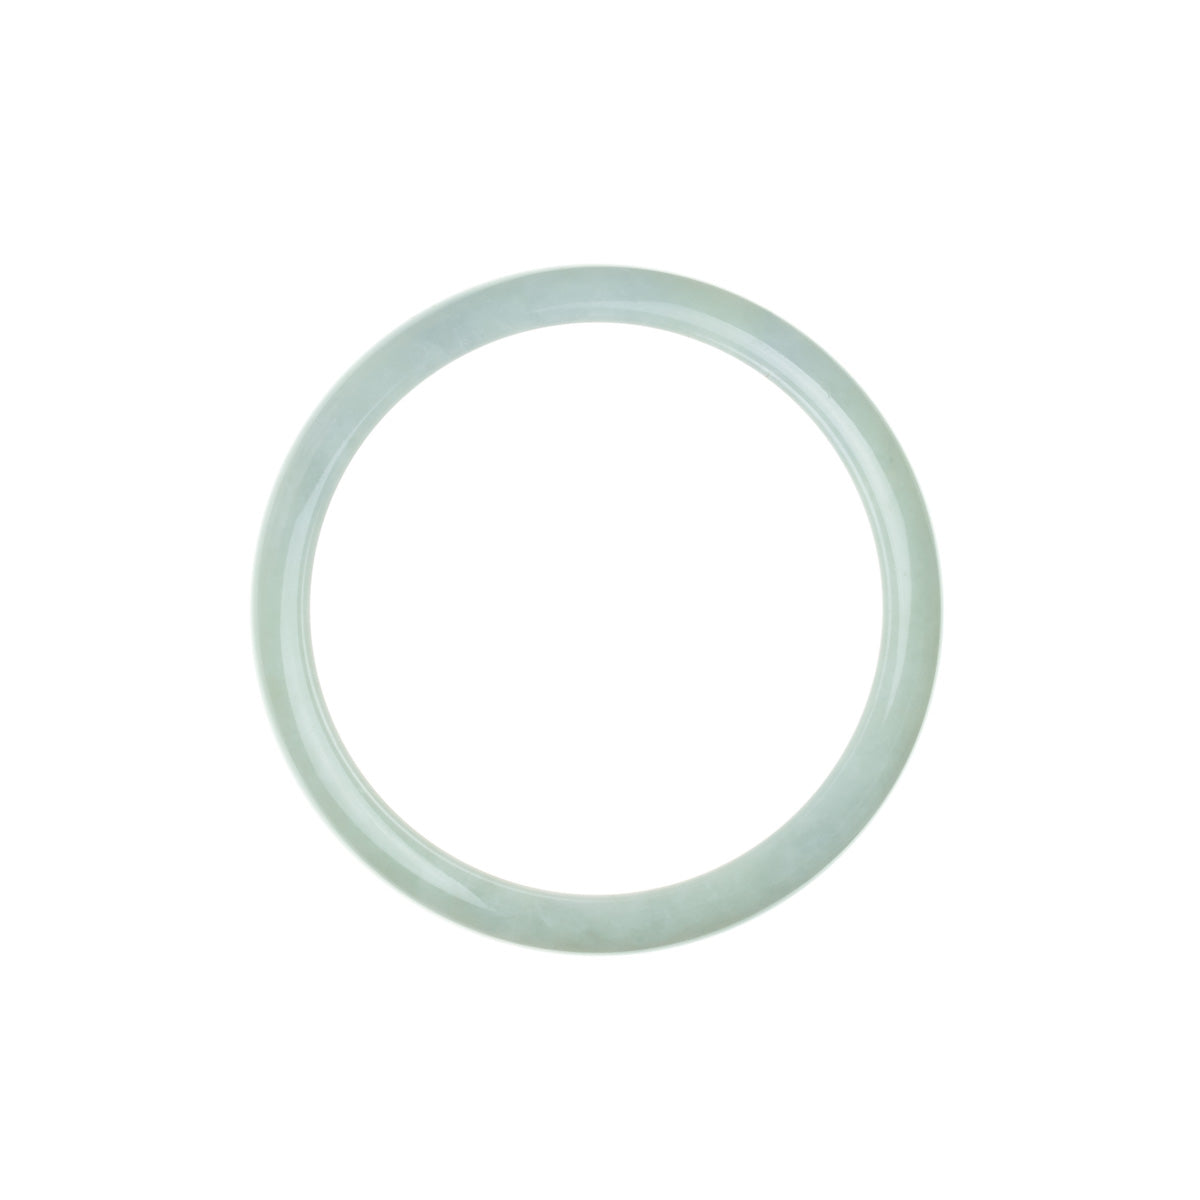 Genuine Grade A Pale Green with hints of Lavender Traditional Jade Bangle Bracelet - 58mm Half Moon